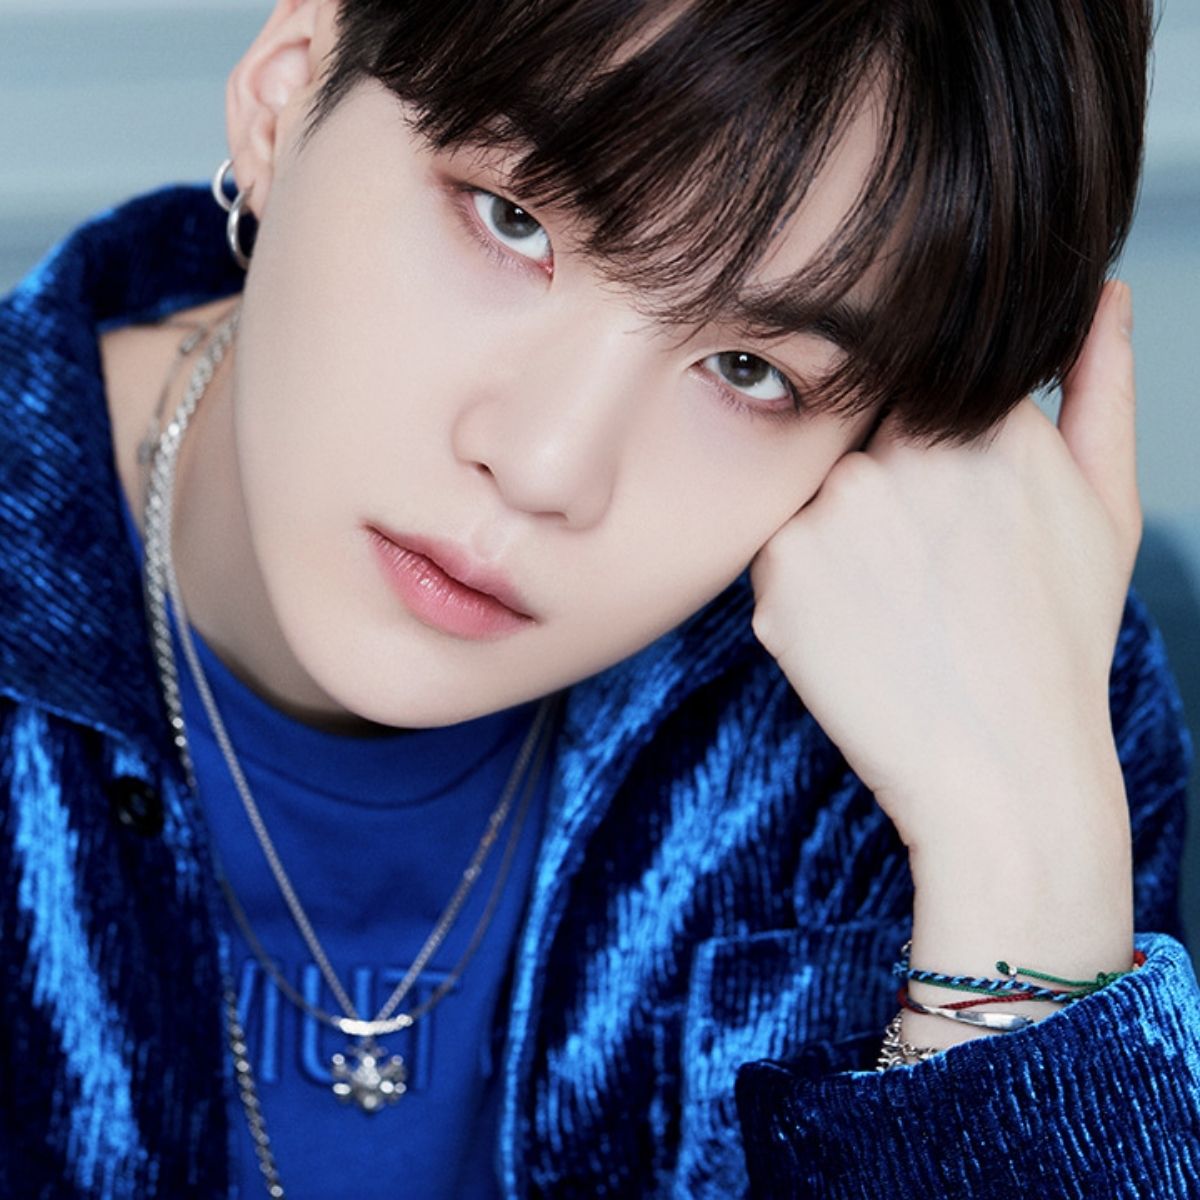 Dear Oppa: A fan writes about how BTS' SUGA's existence lights up ...